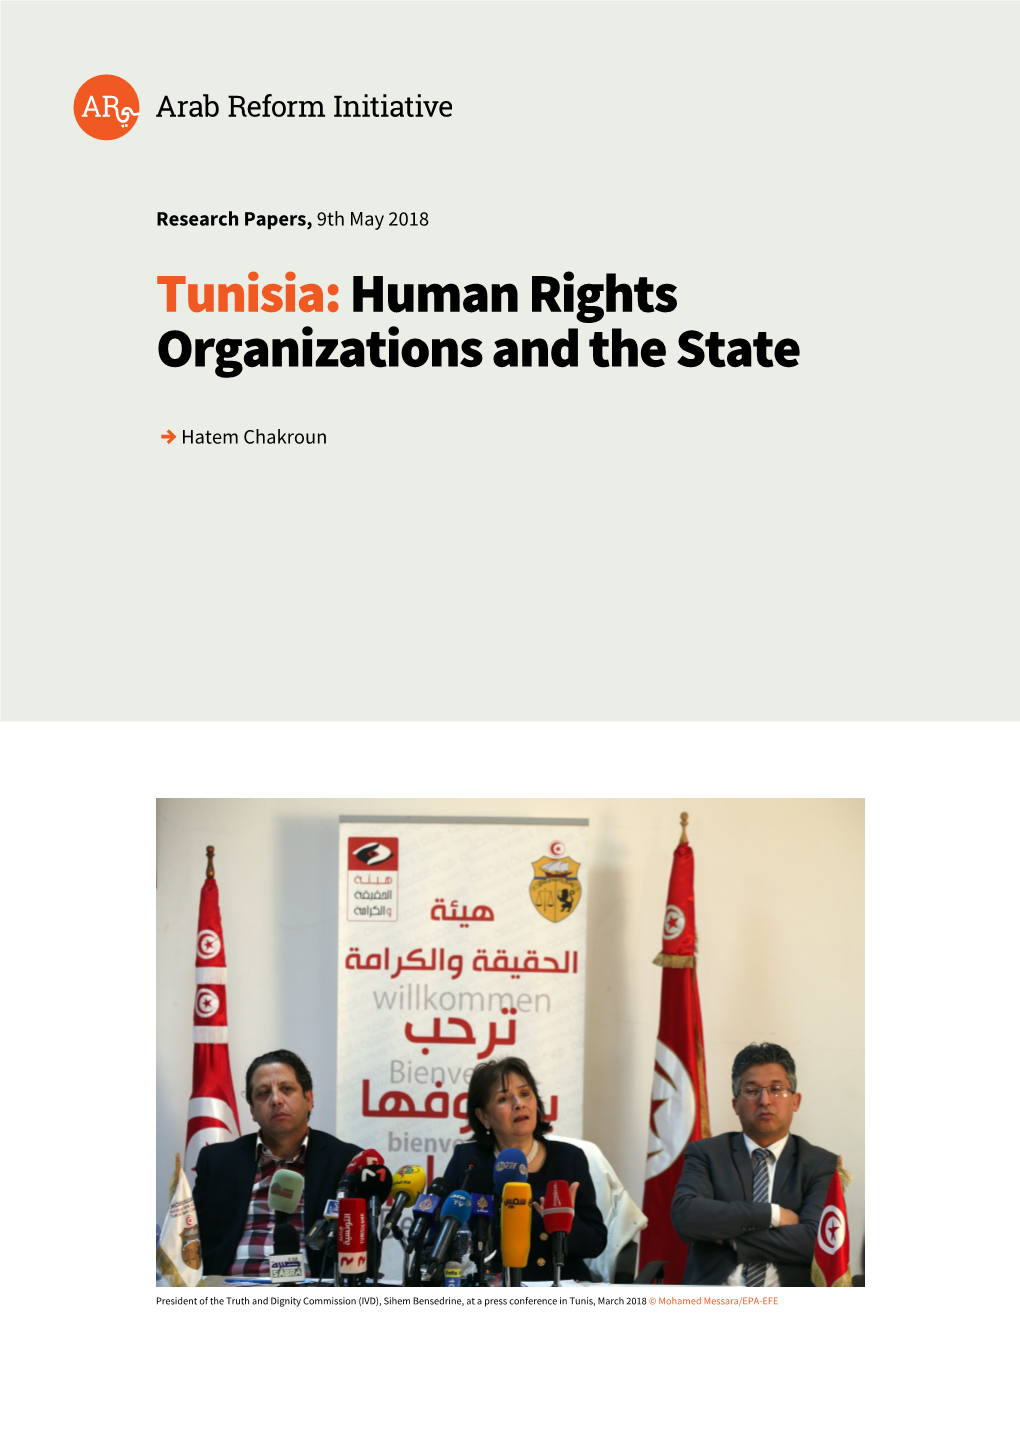 Tunisia: Human Rights Organizations and the State